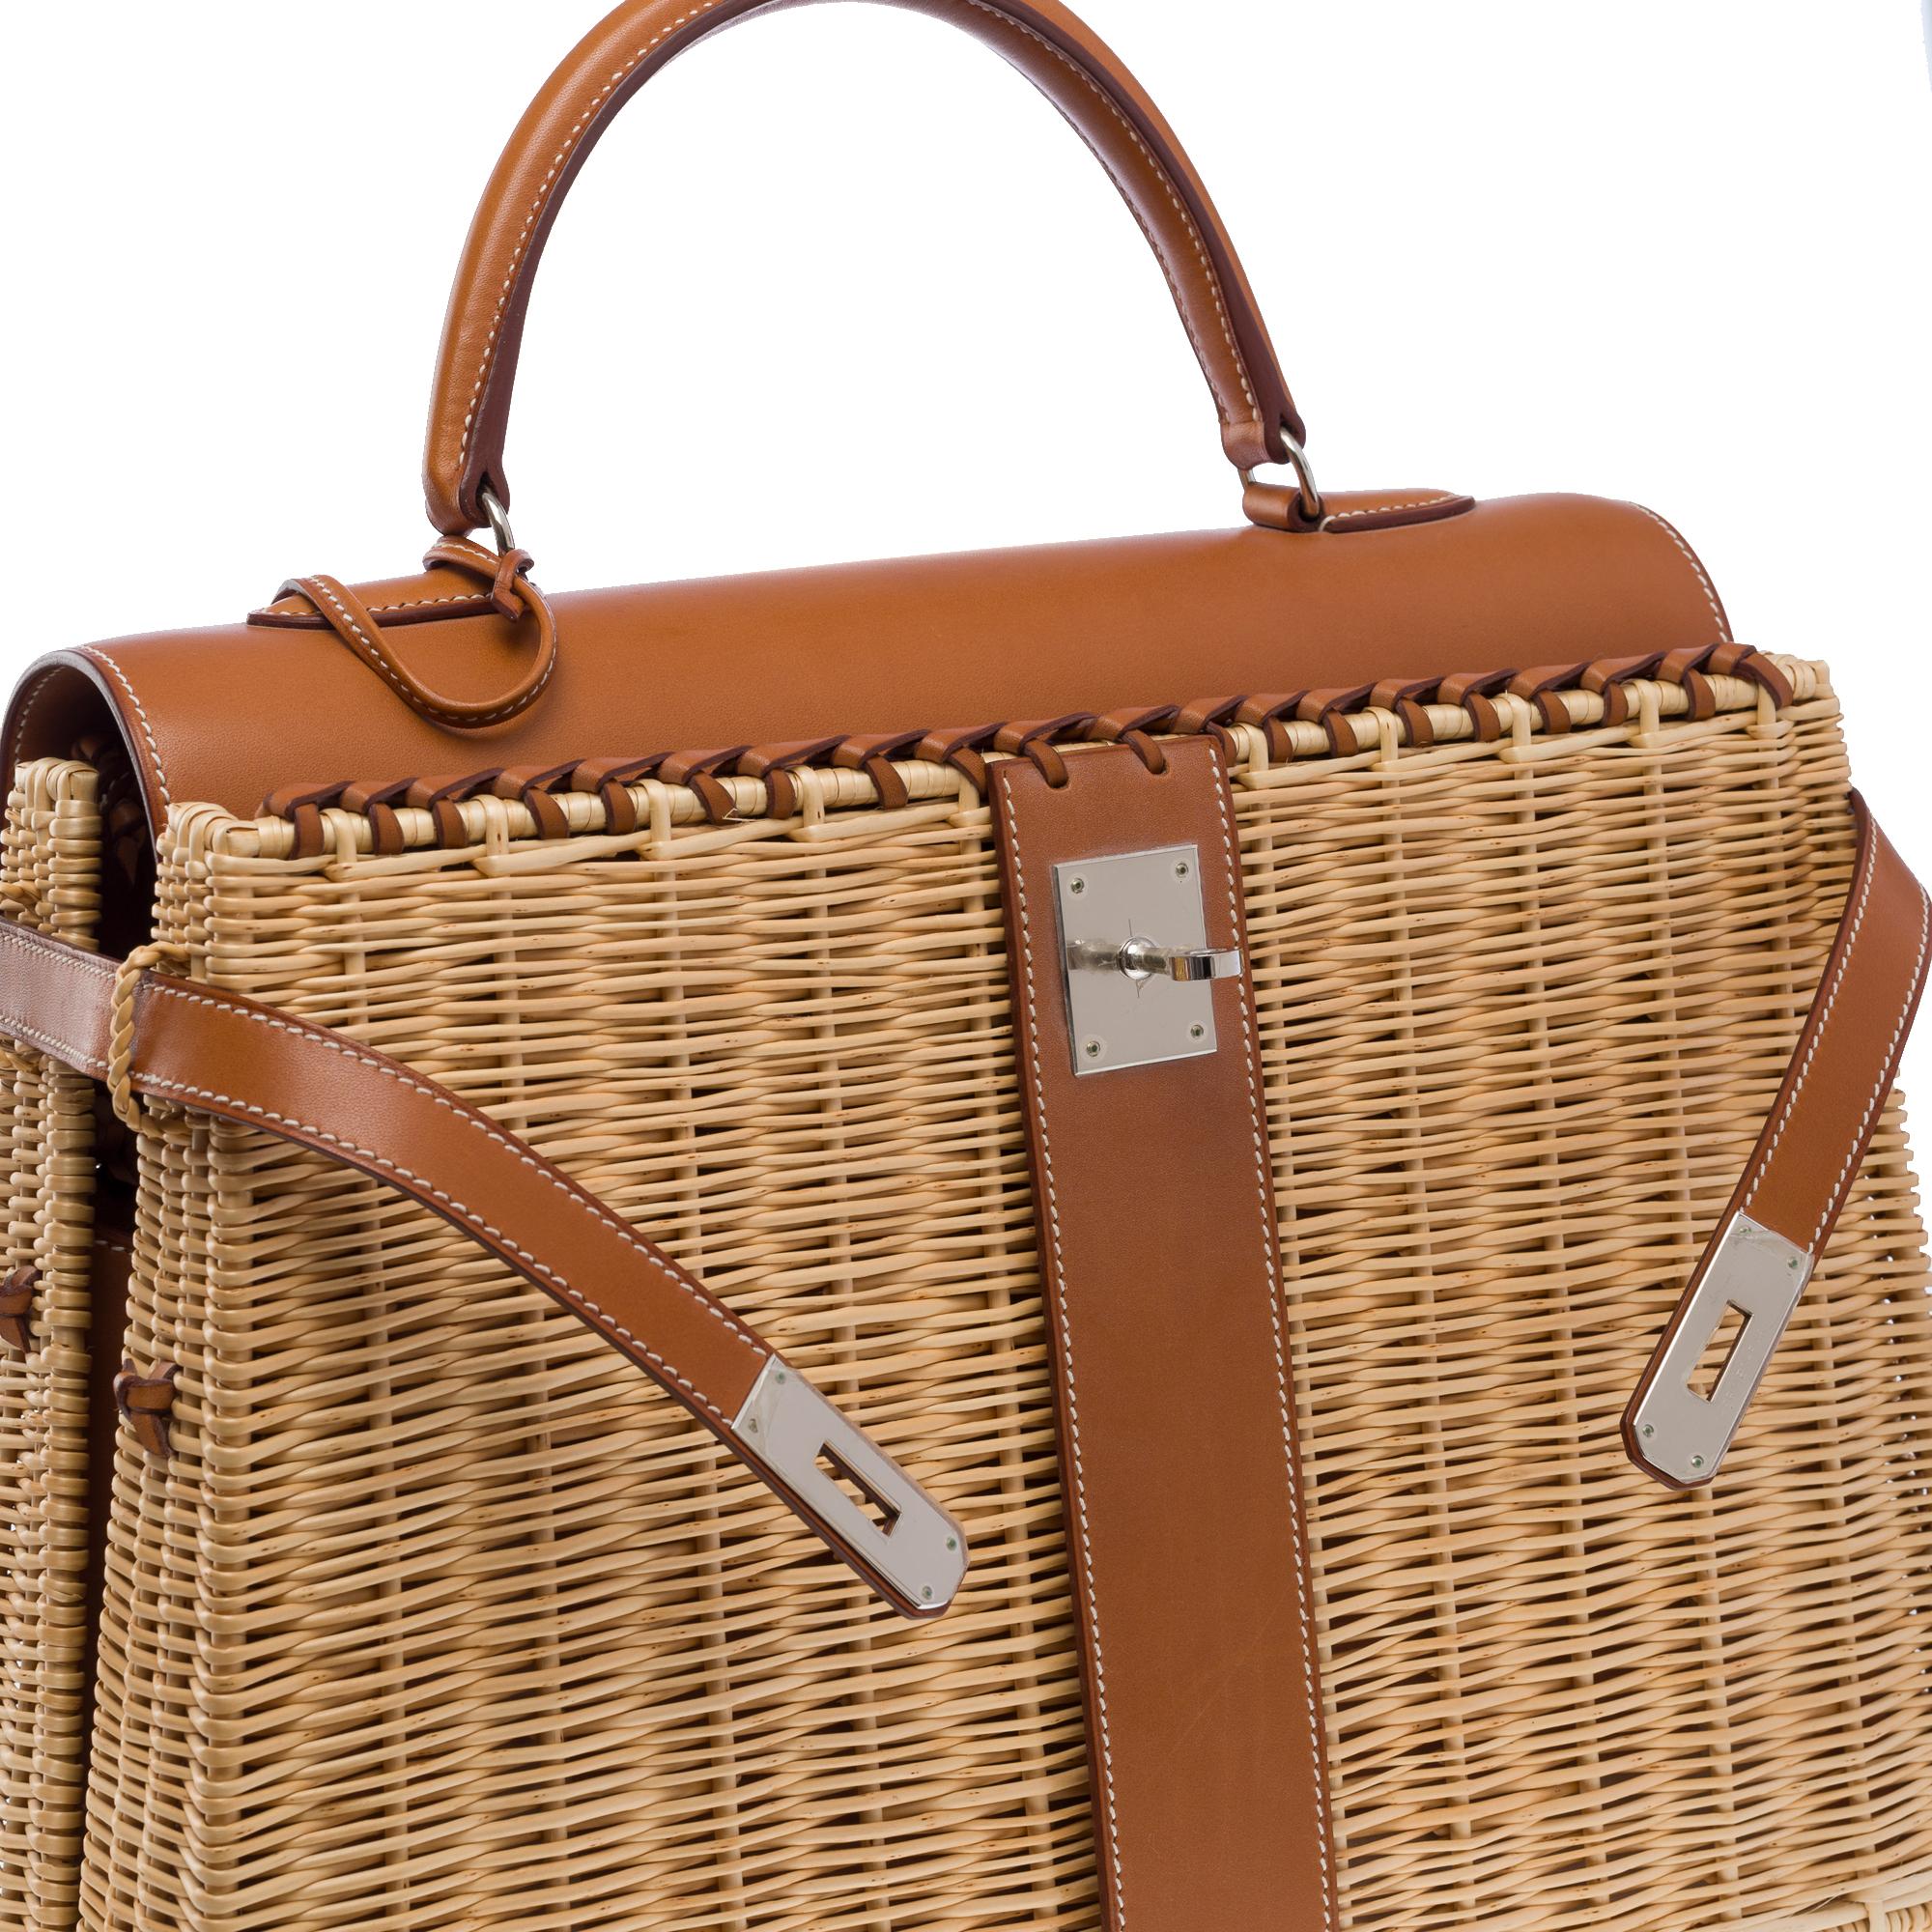 Rare Hermes Kelly 35 Picnic in wicker and barenia leather , SHW For Sale 3